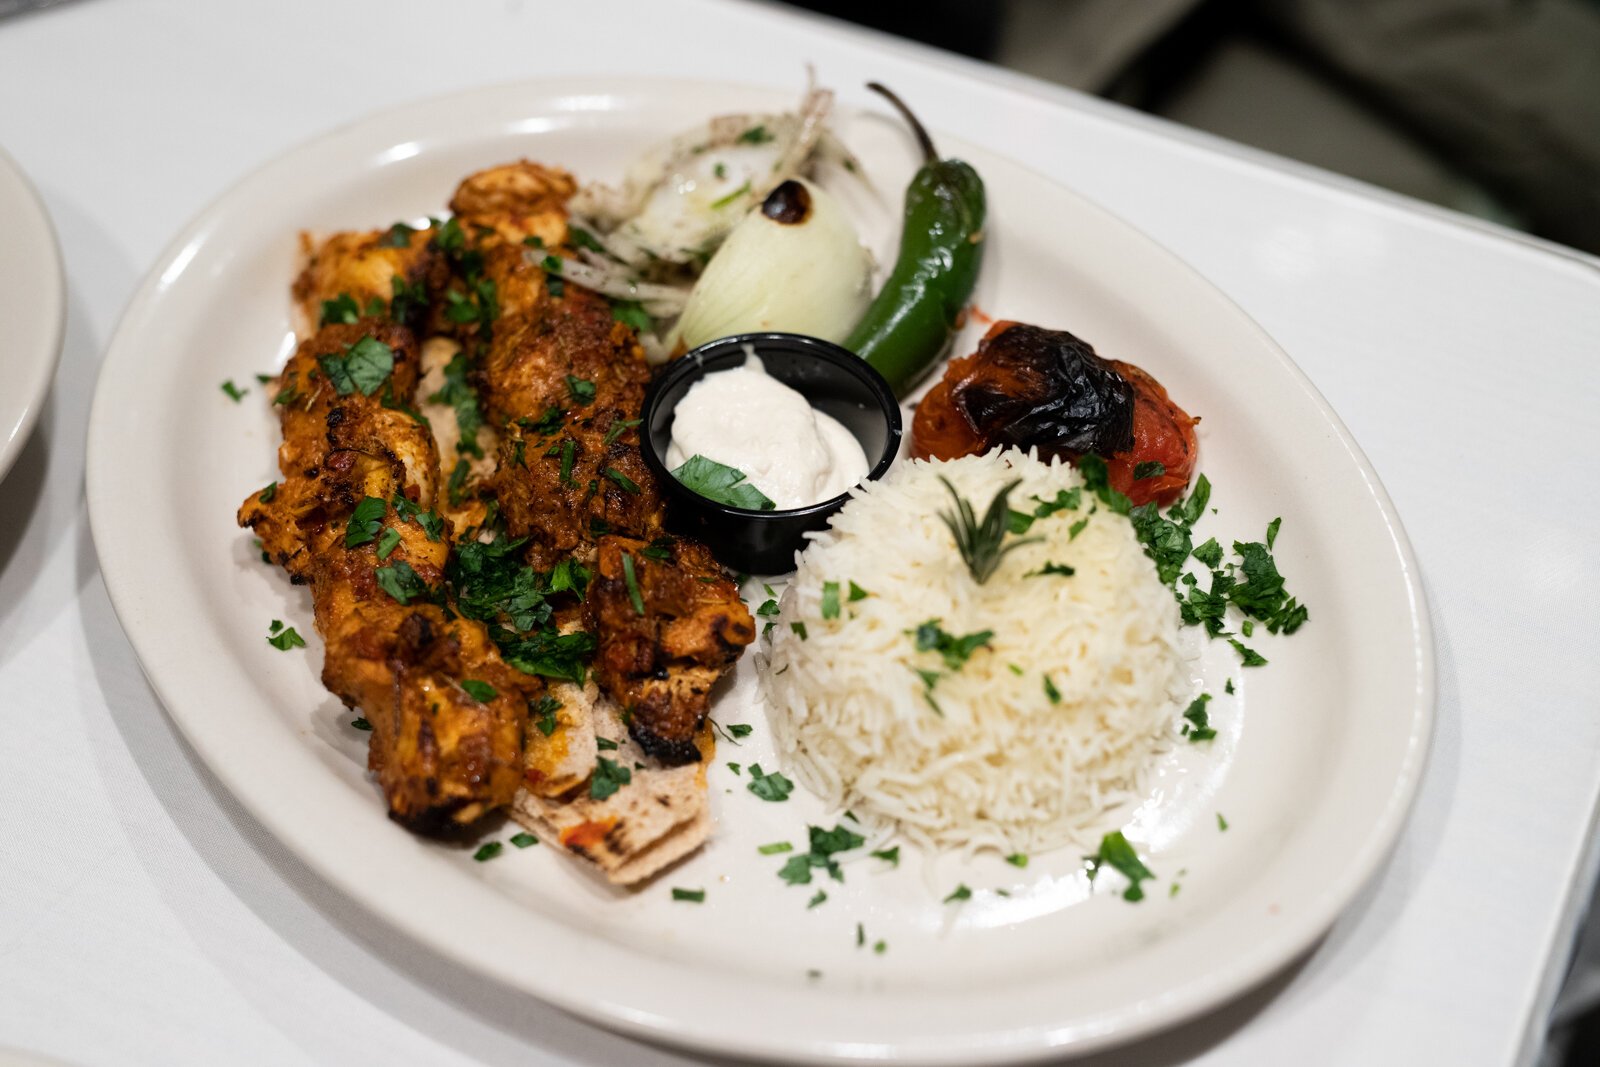 The Chicken Shish Kebab is juicy, salty, slightly tangy, and also rich in spices, with hints of grassy notes from the parsley sprinkled on top. Paired with the Chicken Shish Kebab is a garlic sauce that’s popular in Middle Eastern and Mediterranean r